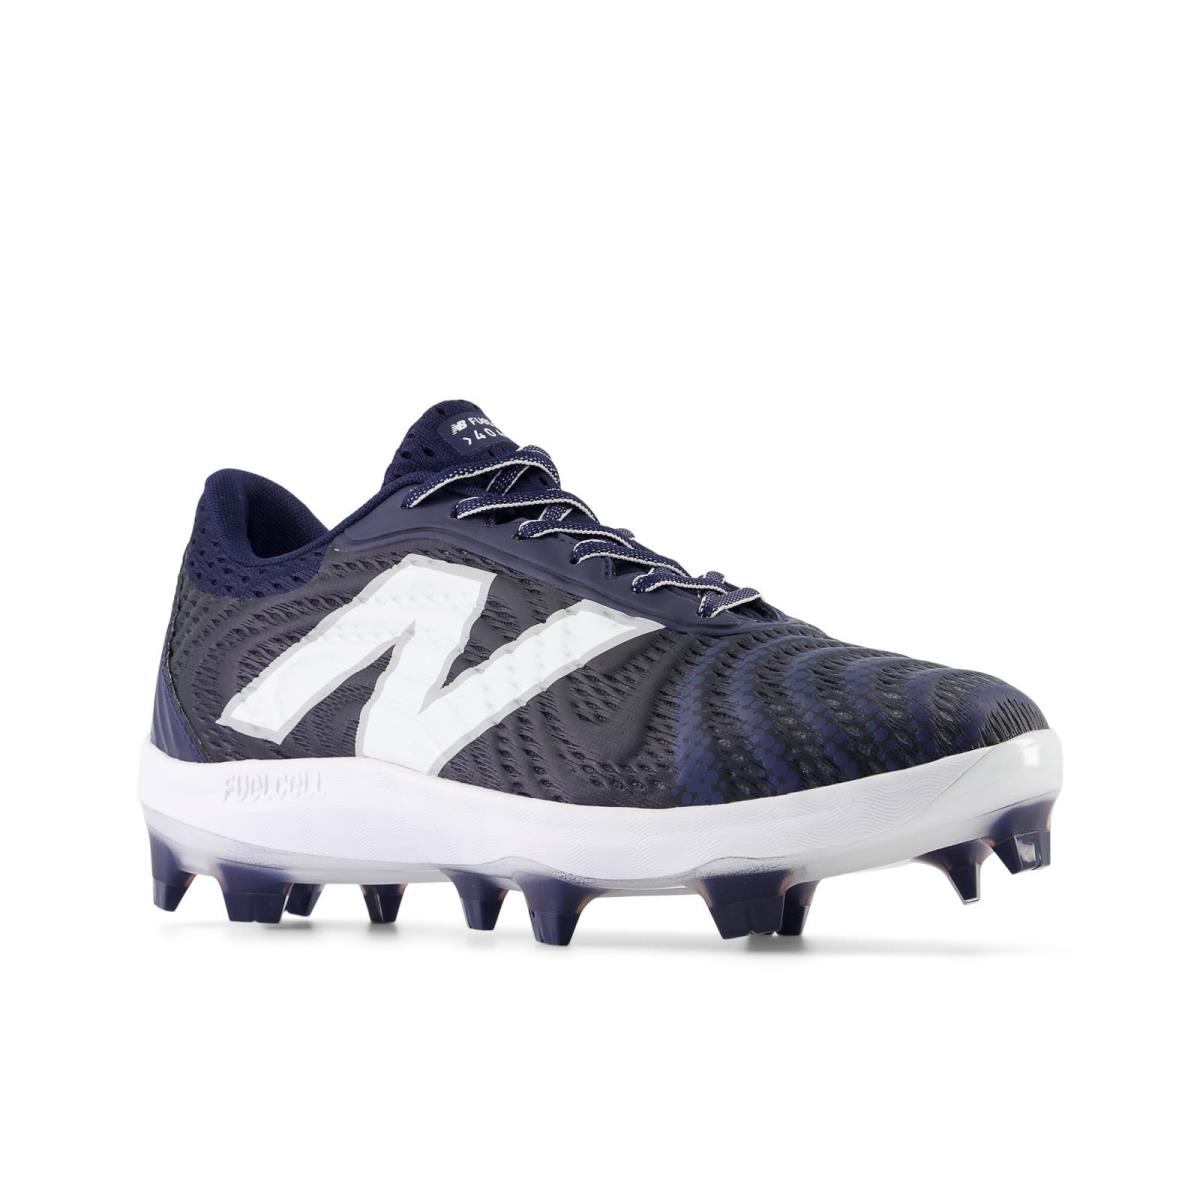 Man`s Sneakers Athletic Shoes New Balance Fuelcell 4040v7 Molded Team Navy/Optic White